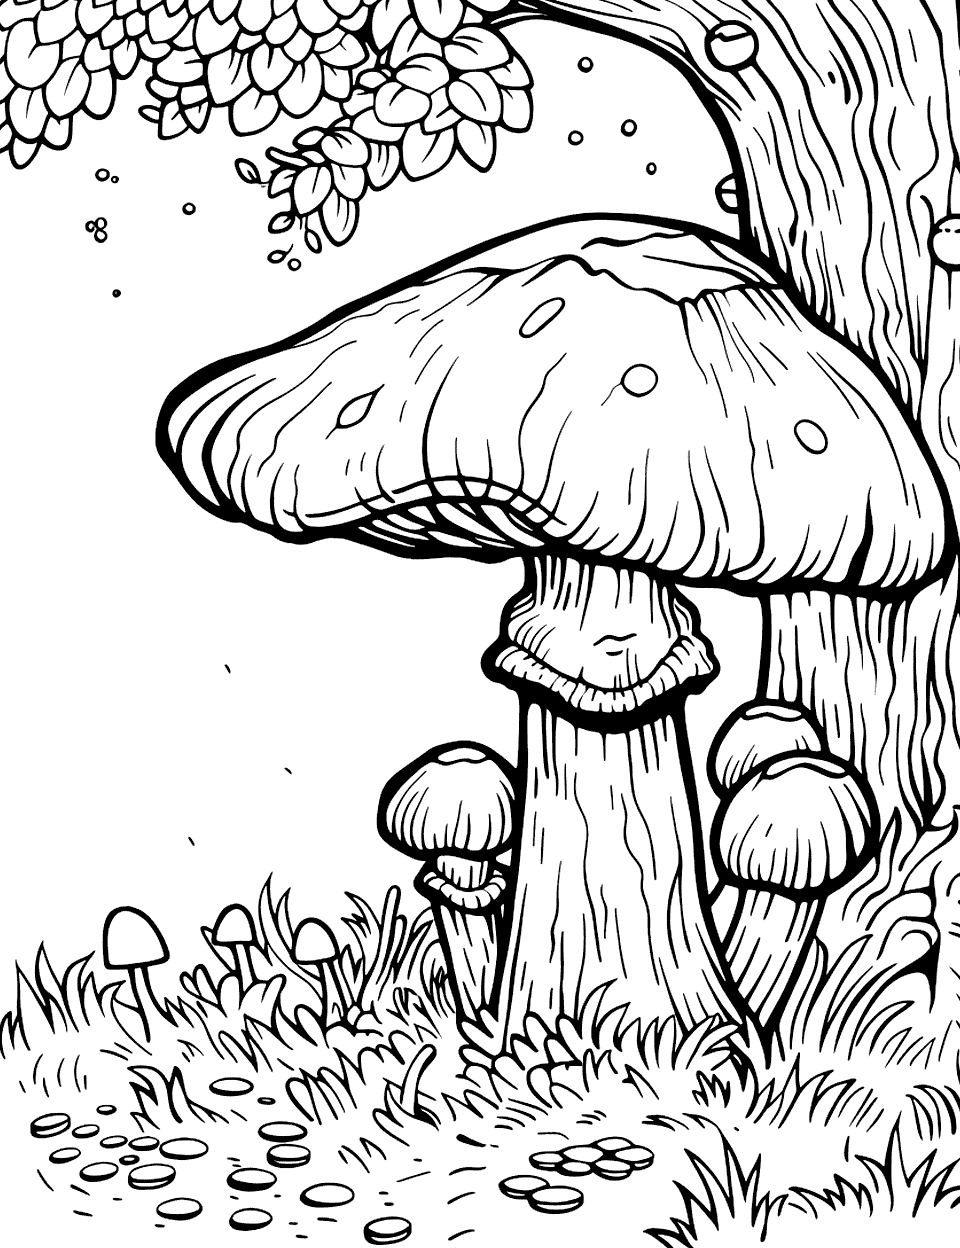 Cool Shaded Mushroom Scene Coloring Page - Mushrooms grow in the cool shade of a large tree.